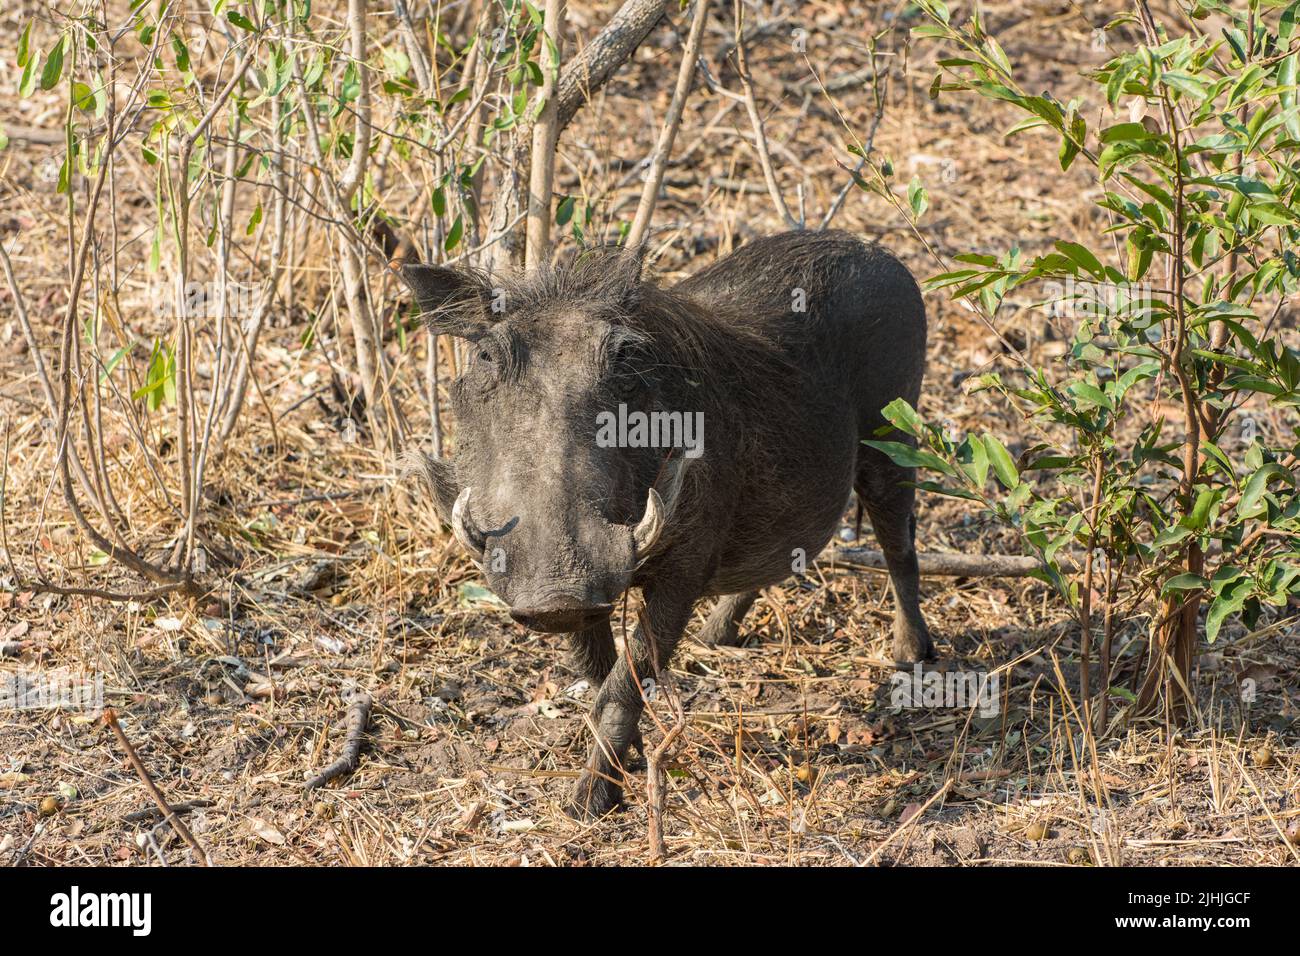 Warthog walking with head up looking towards the camera. Kruger Park, South Africa. Stock Photo